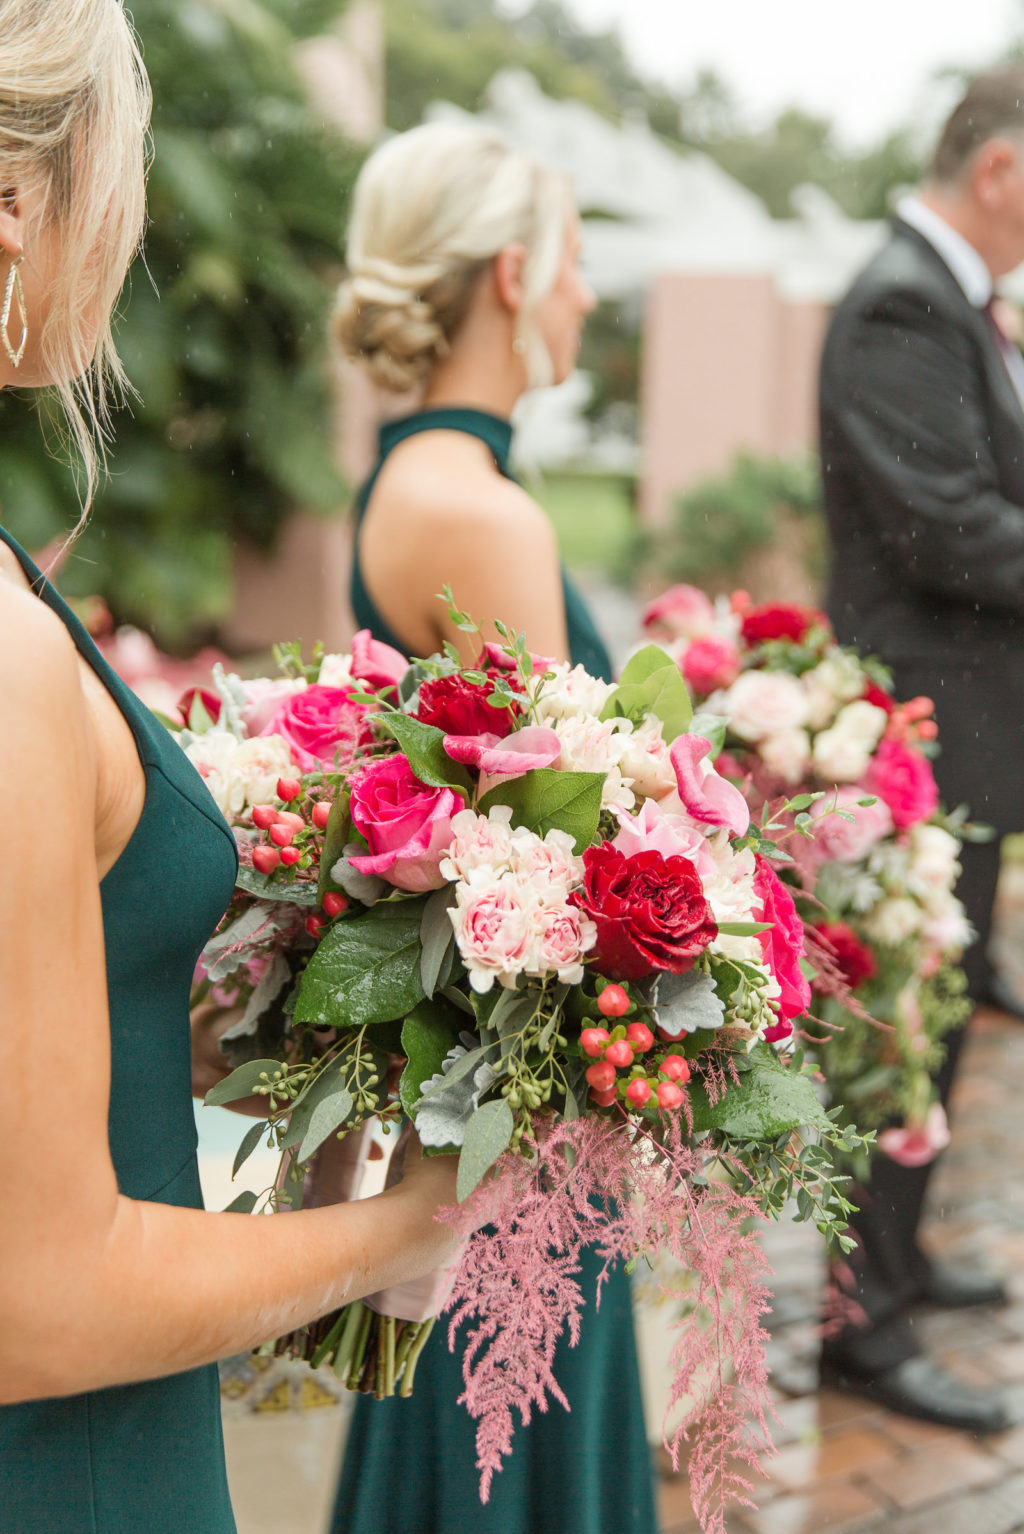 Bridesmaids in Emerald Green Dresses Holding Pink, Red Roses and Berries Floral Bouquet with Greenery Lush Floral Bouquet